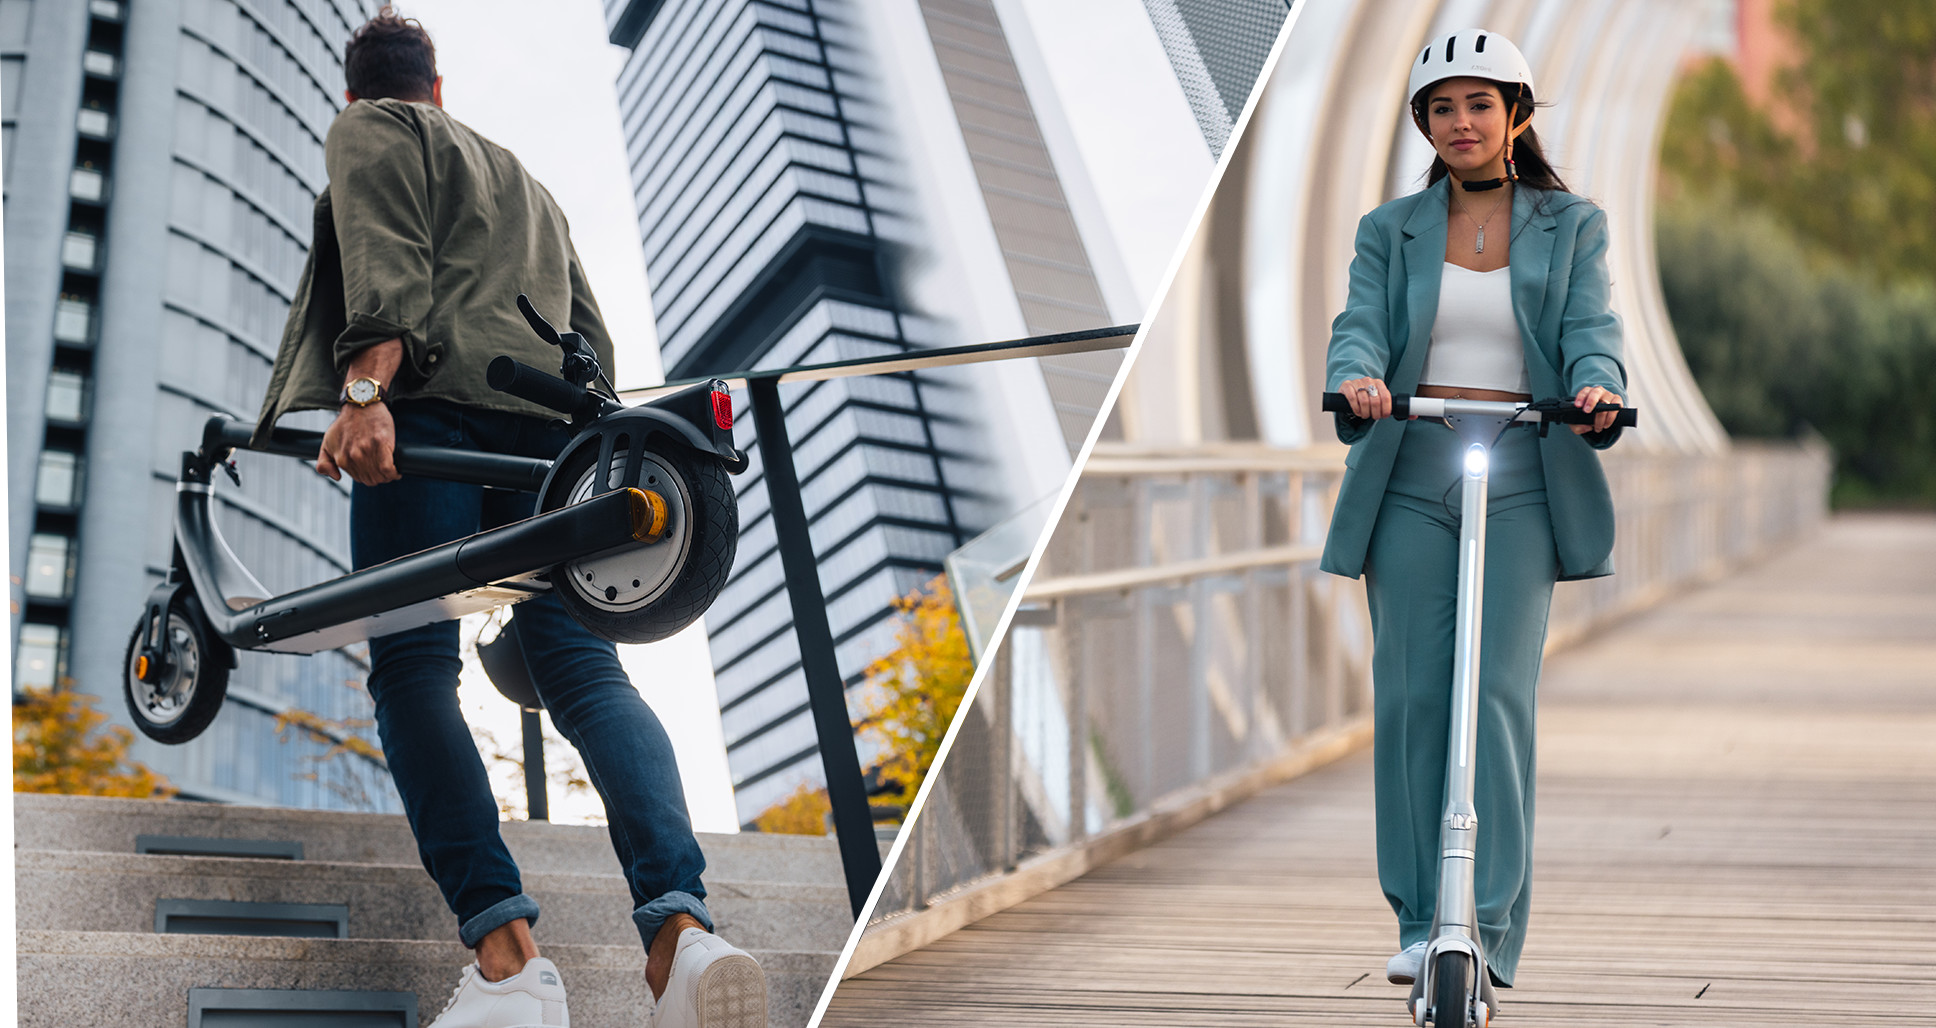 Atomi's latest e-scooter doubles up on security however stays impartial on different options